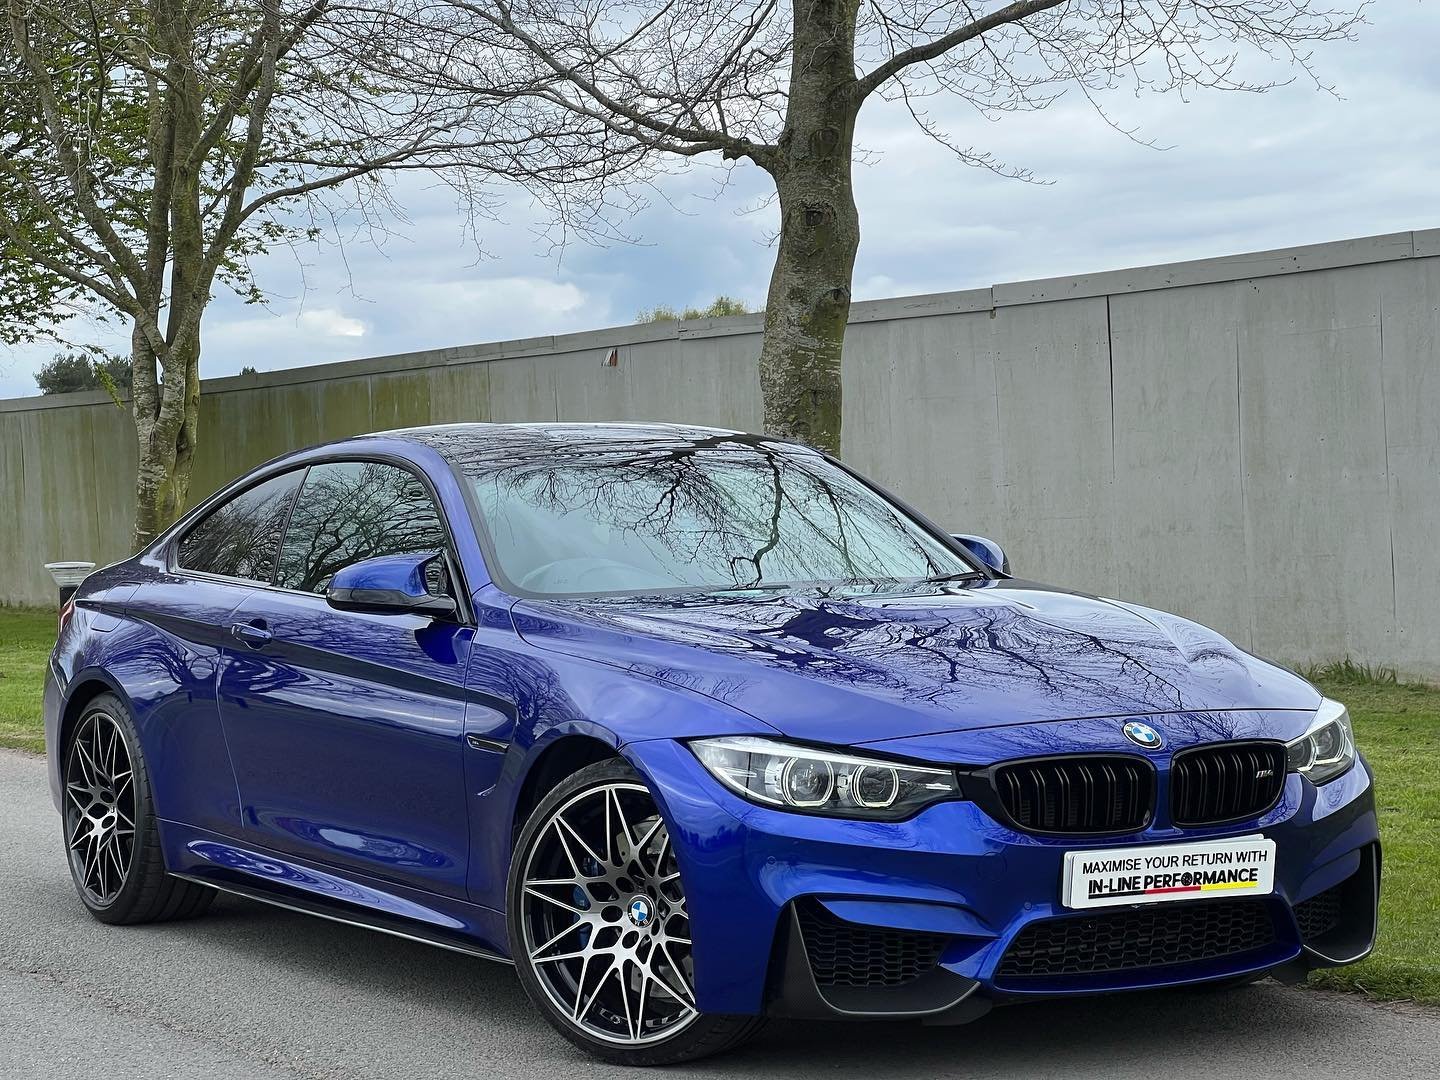 Here At IN-LINE PERFORMANCE We Take Pride And Joy Into Supplying You With The Very Best Of Performance Engineering. We Are Proud To Present To You This 2018 BMW M4 Competition Finished In San Marino Blue Metallic With Black Merino Leather Interior.
3